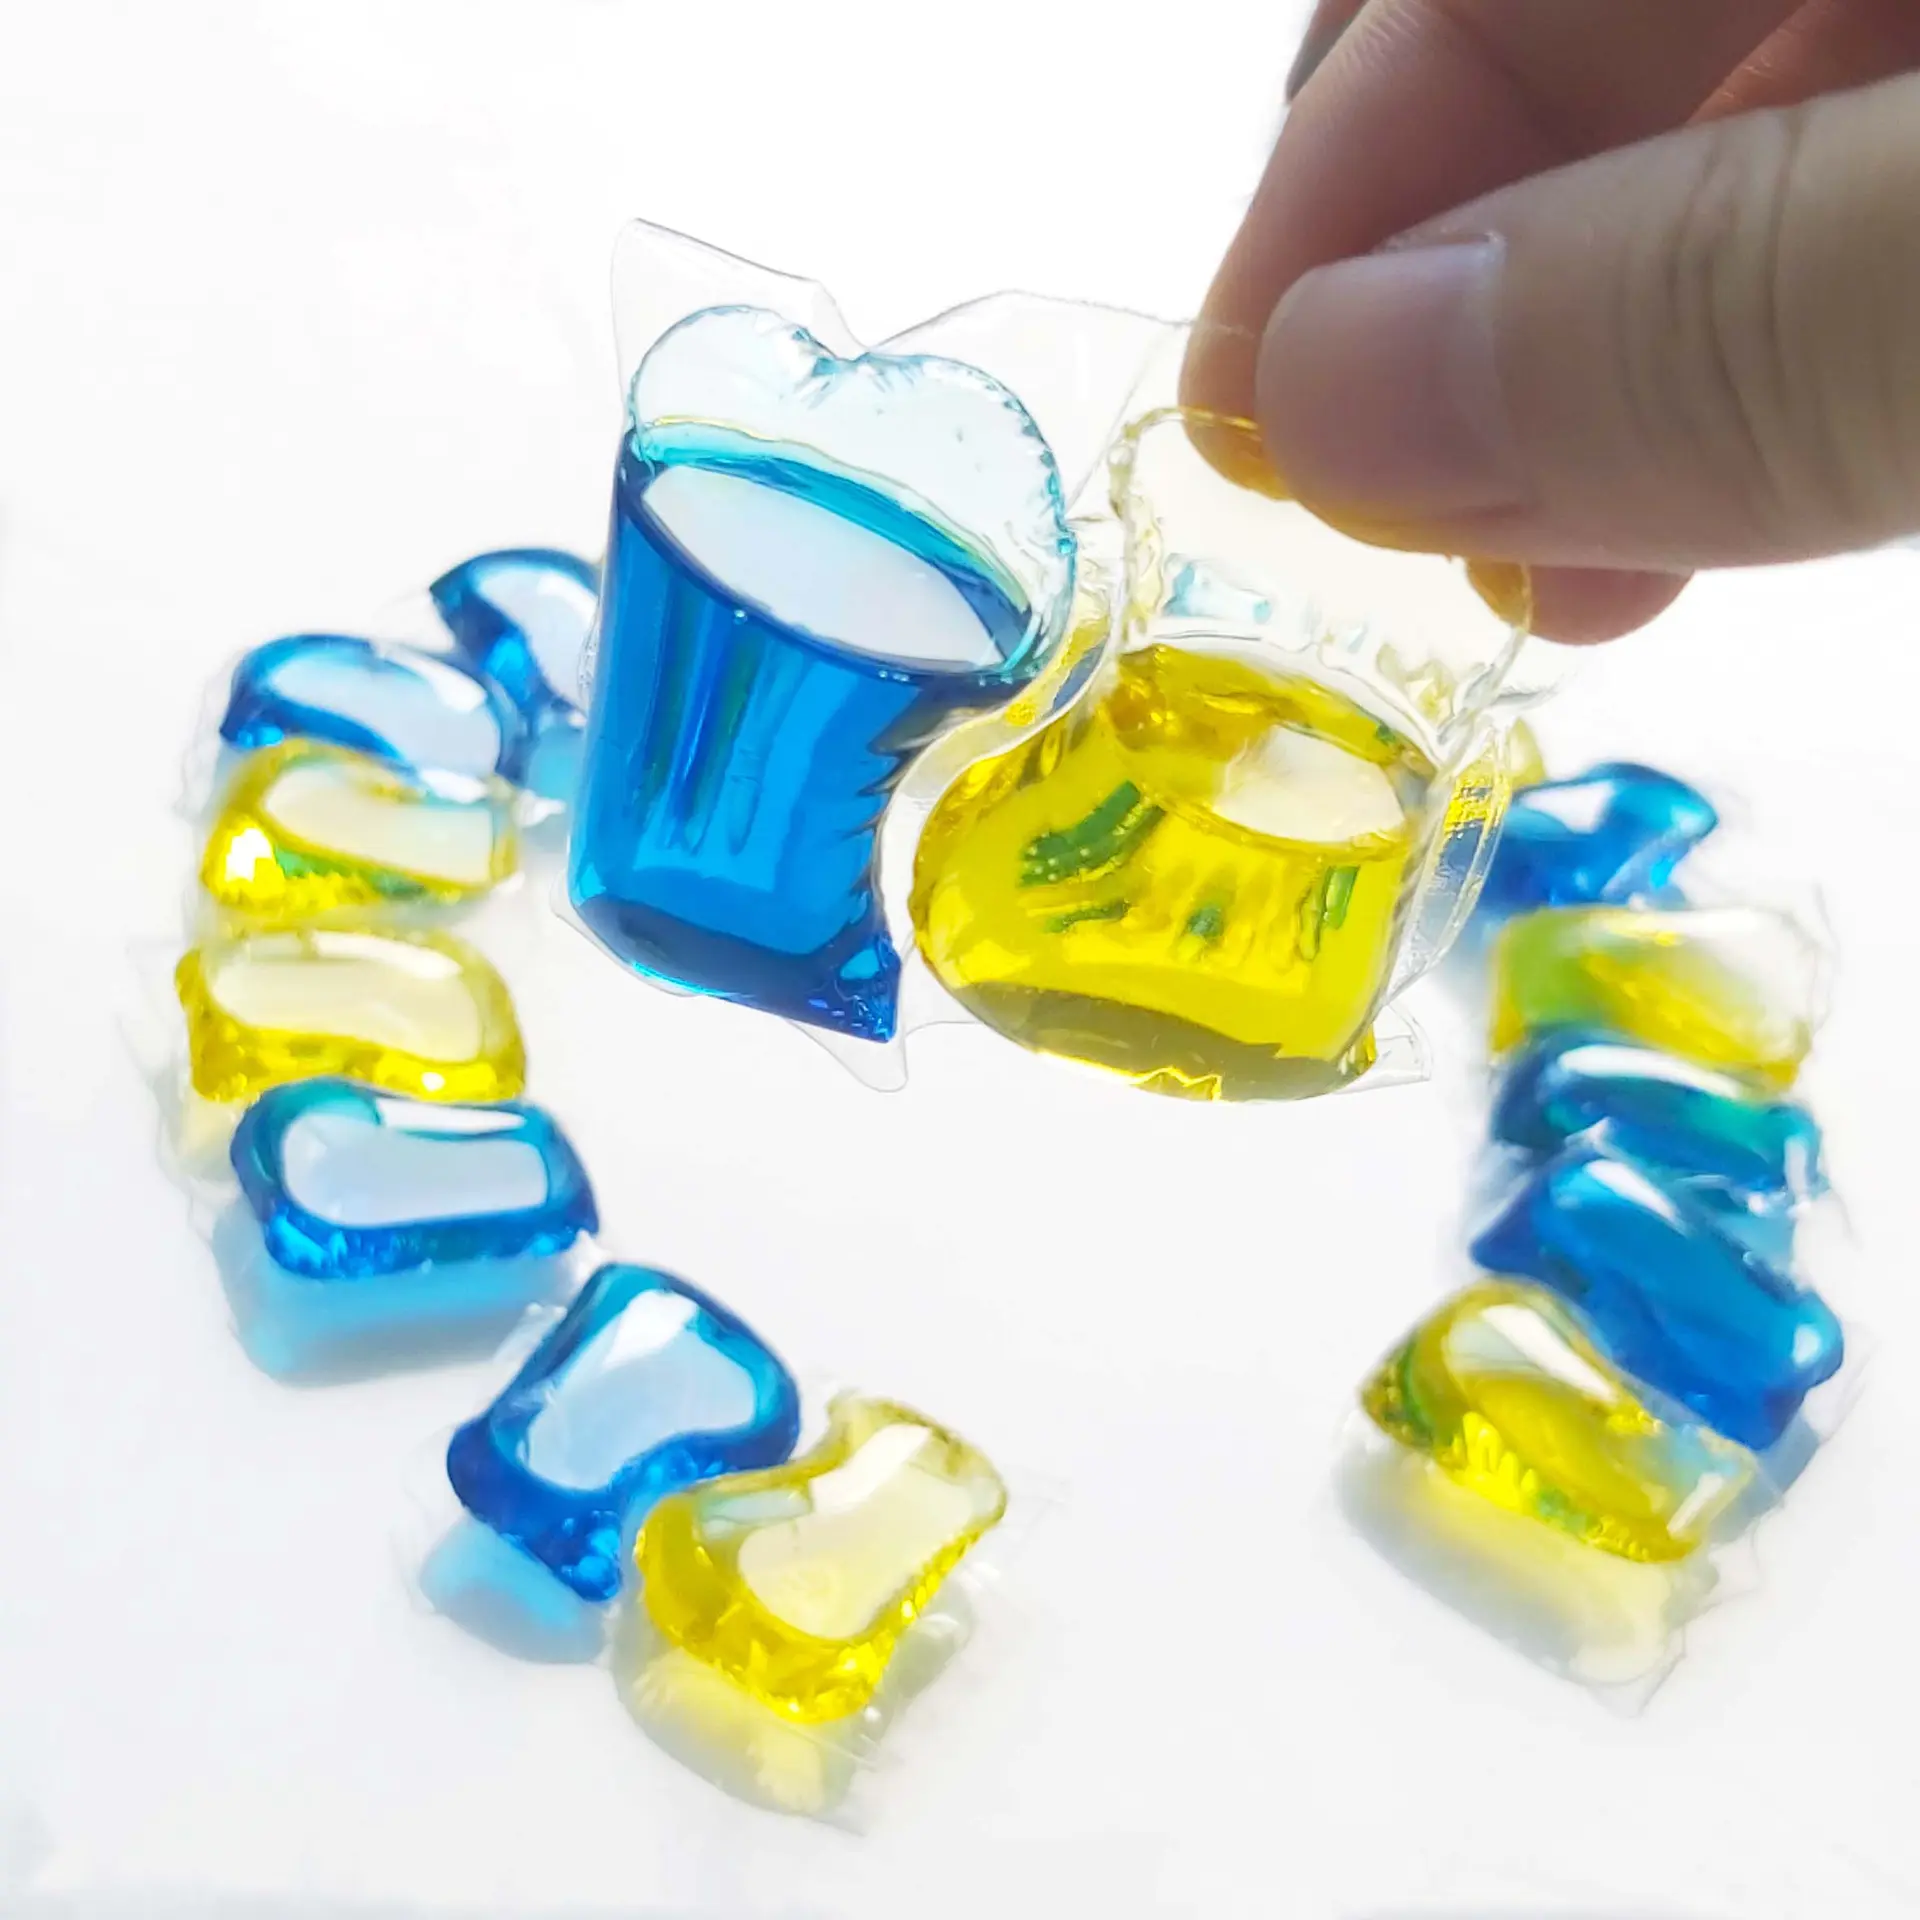 laundry water soluble pods High Quality Fragrance double chamber detergent capsules laundry pod